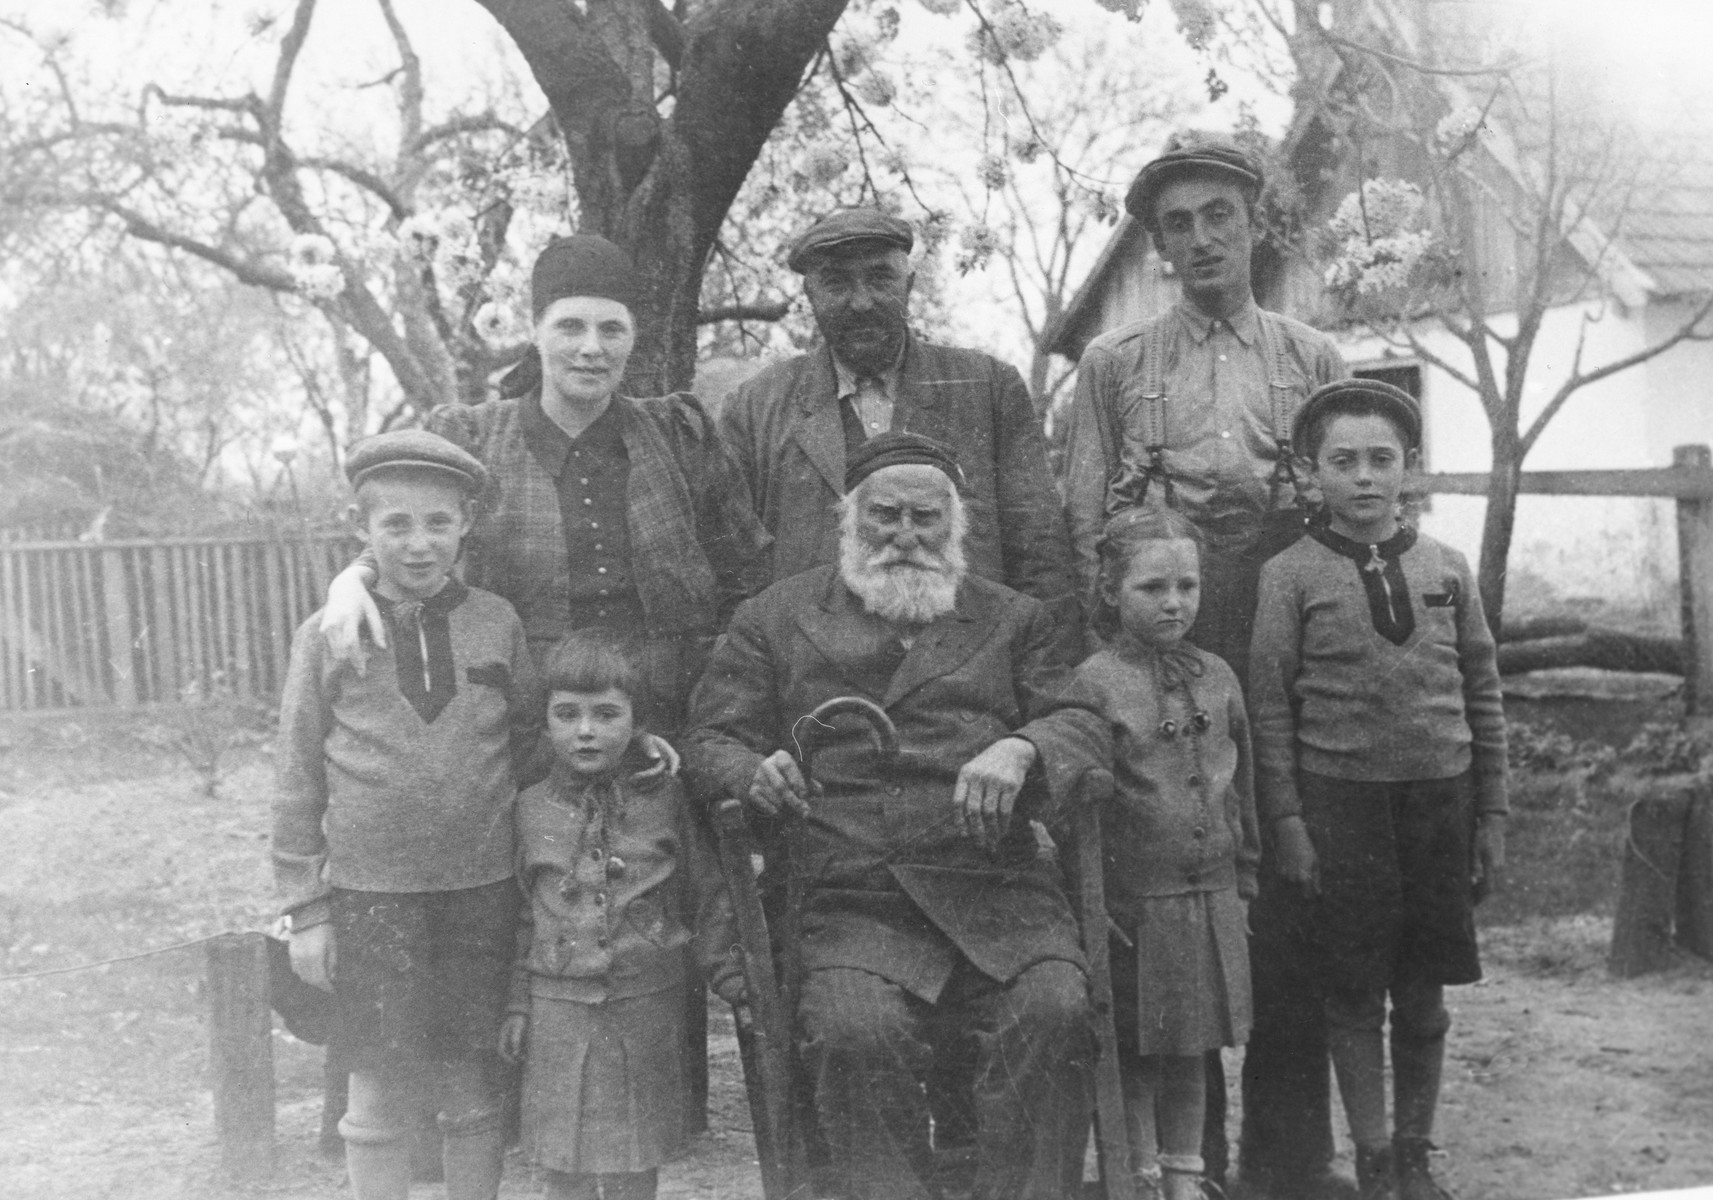 The Farkas family poses in the backyard for a family portrait taken by a visiting uncle from America.

Pictured front row (left to right) are Zoltan Farkas, Judit Farkas, Yaakov Koppel Farkas, Eva Farkas, and Erwin Farkas.  In the back row are Frieda Frankel, Jeno Farkas, and Sholom.